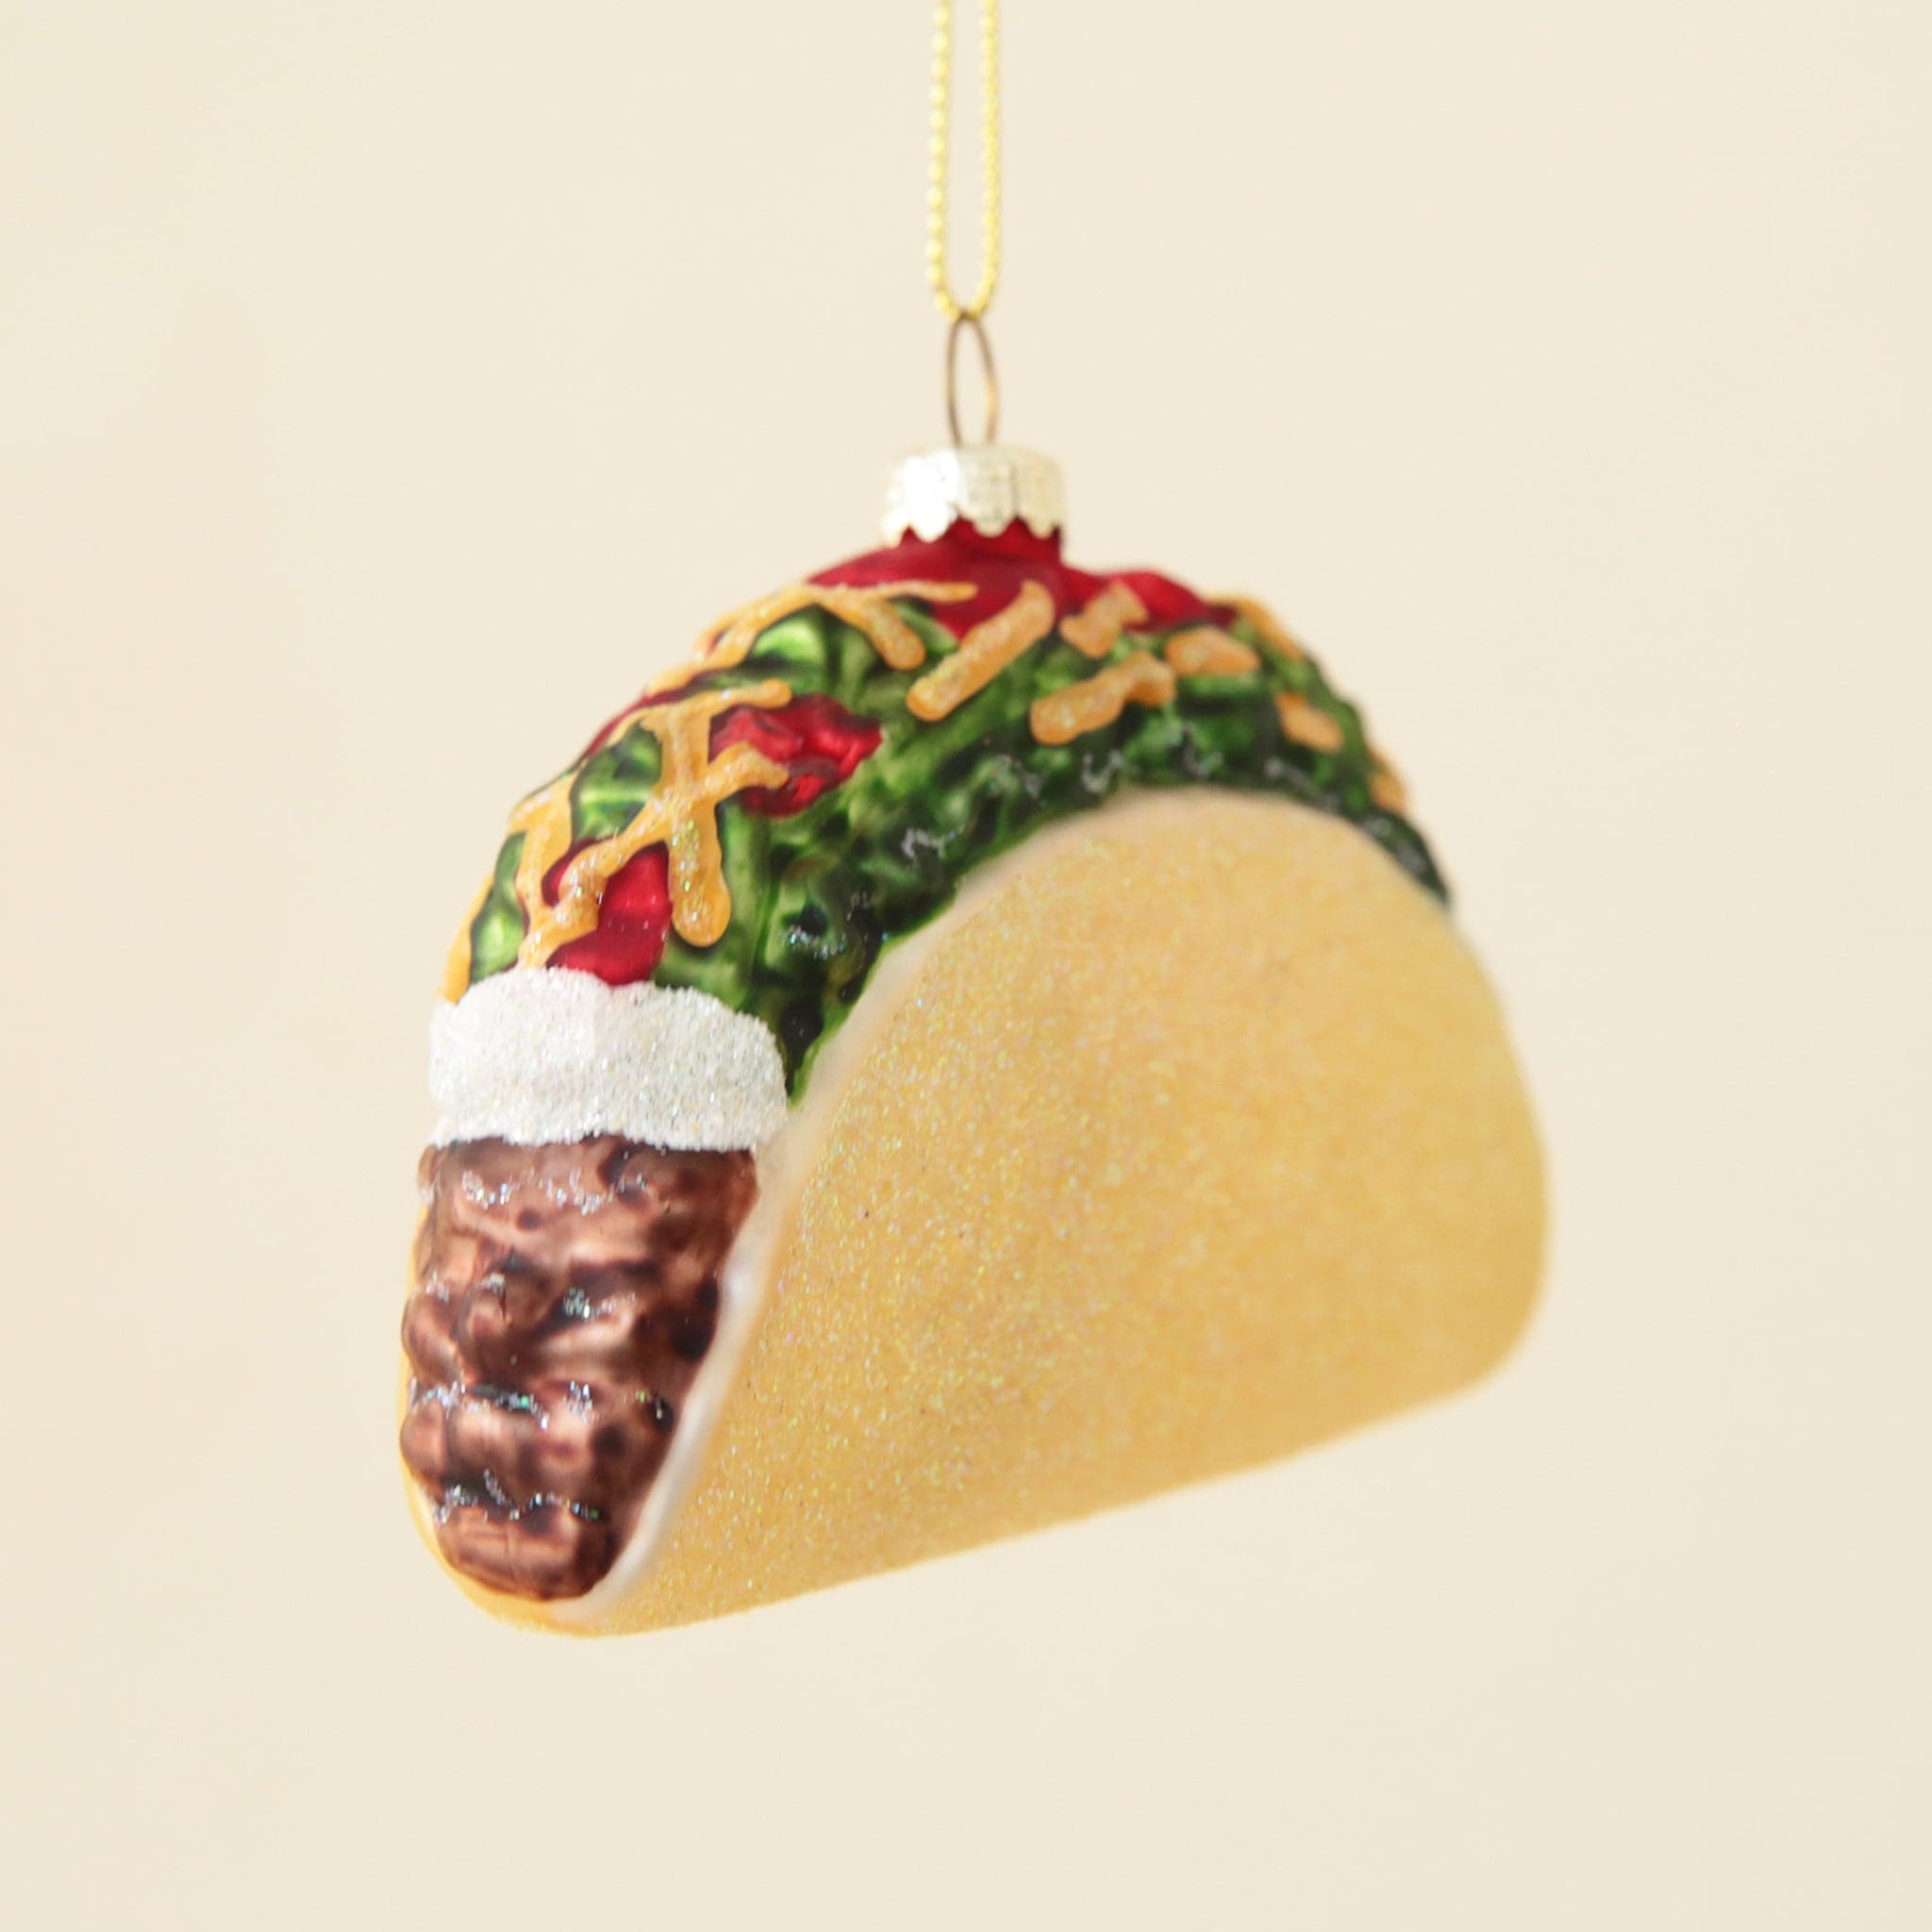 There’s a taco ornament hanging in front of a peachy background. The taco has a glittery yellow taco shell. Inside is brown glittery meat, white glittery sour cream, green glittery lettuce, red glittery tomatoes and yellow glittery cheese. The ornament is hanging by a gold hook and gold string.  